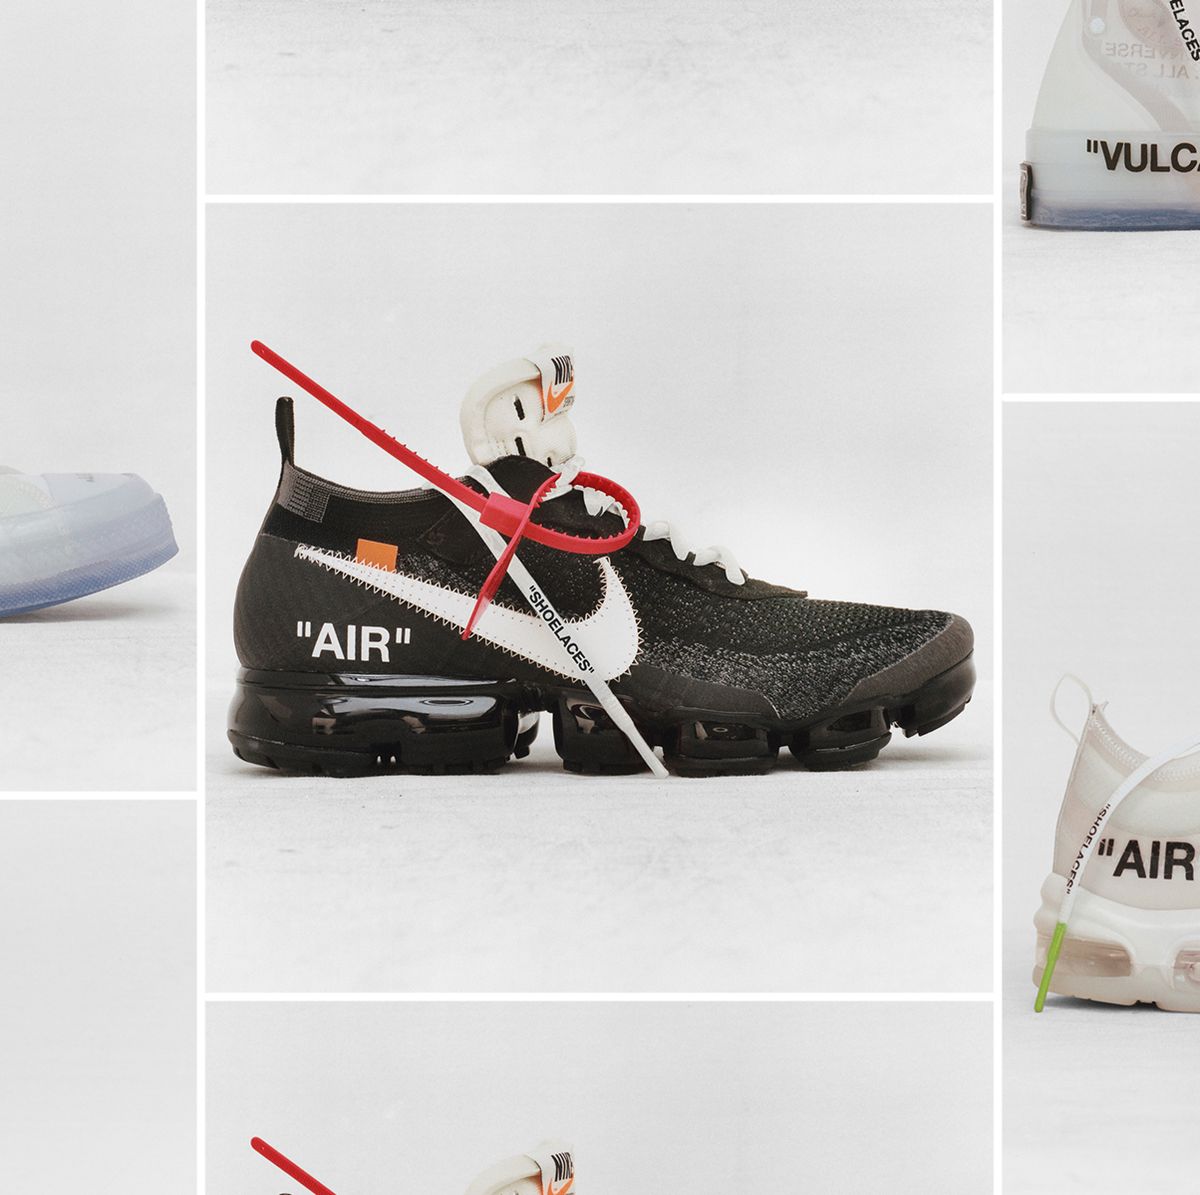 Virgil Abloh wants your help on his latest Nike collaboration